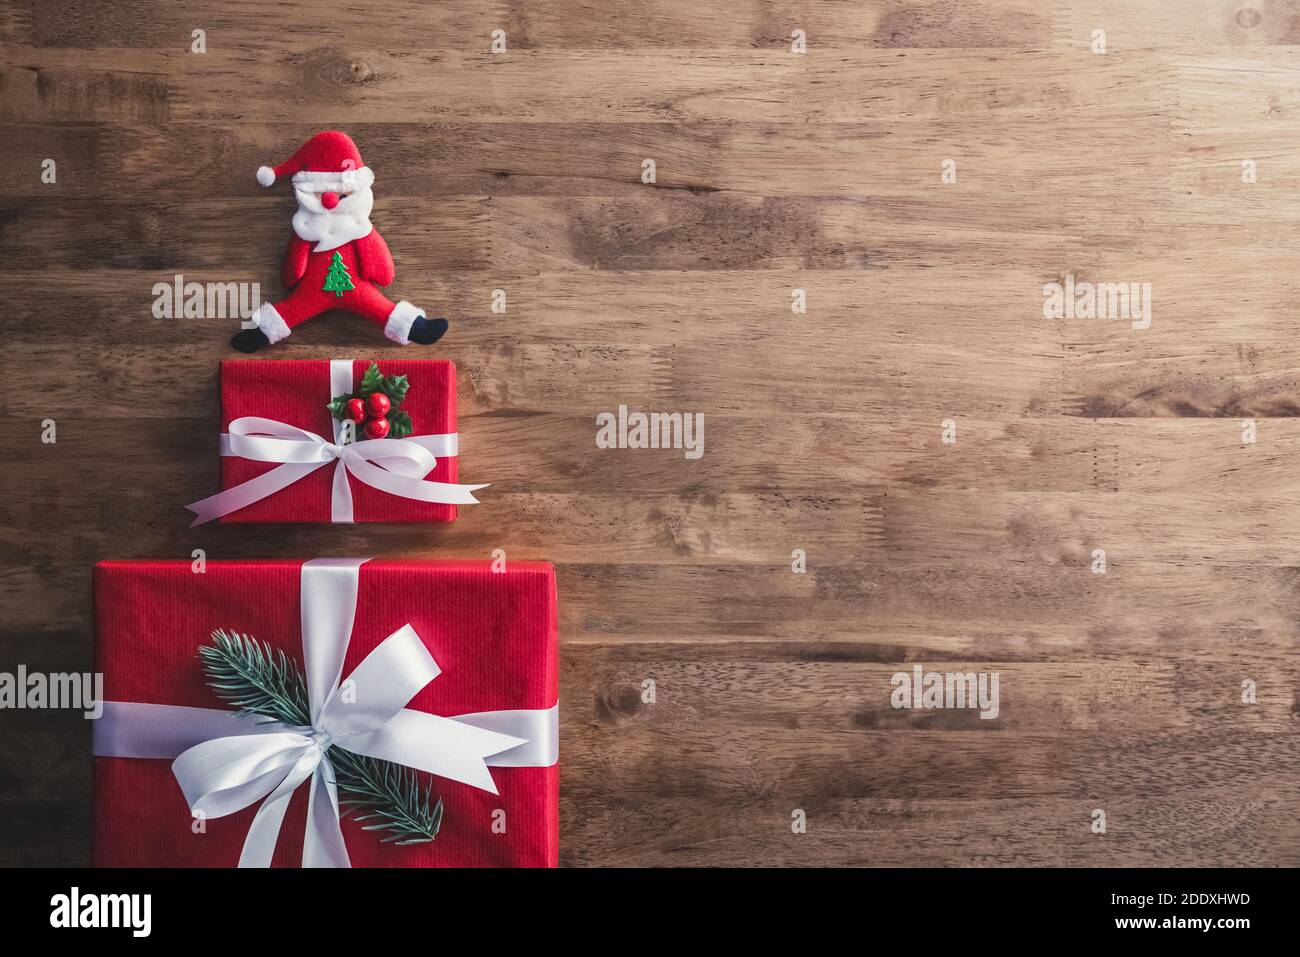 Lovely red Christmas gift boxes and decorated items on wood  background, top view with copy spce Stock Photo